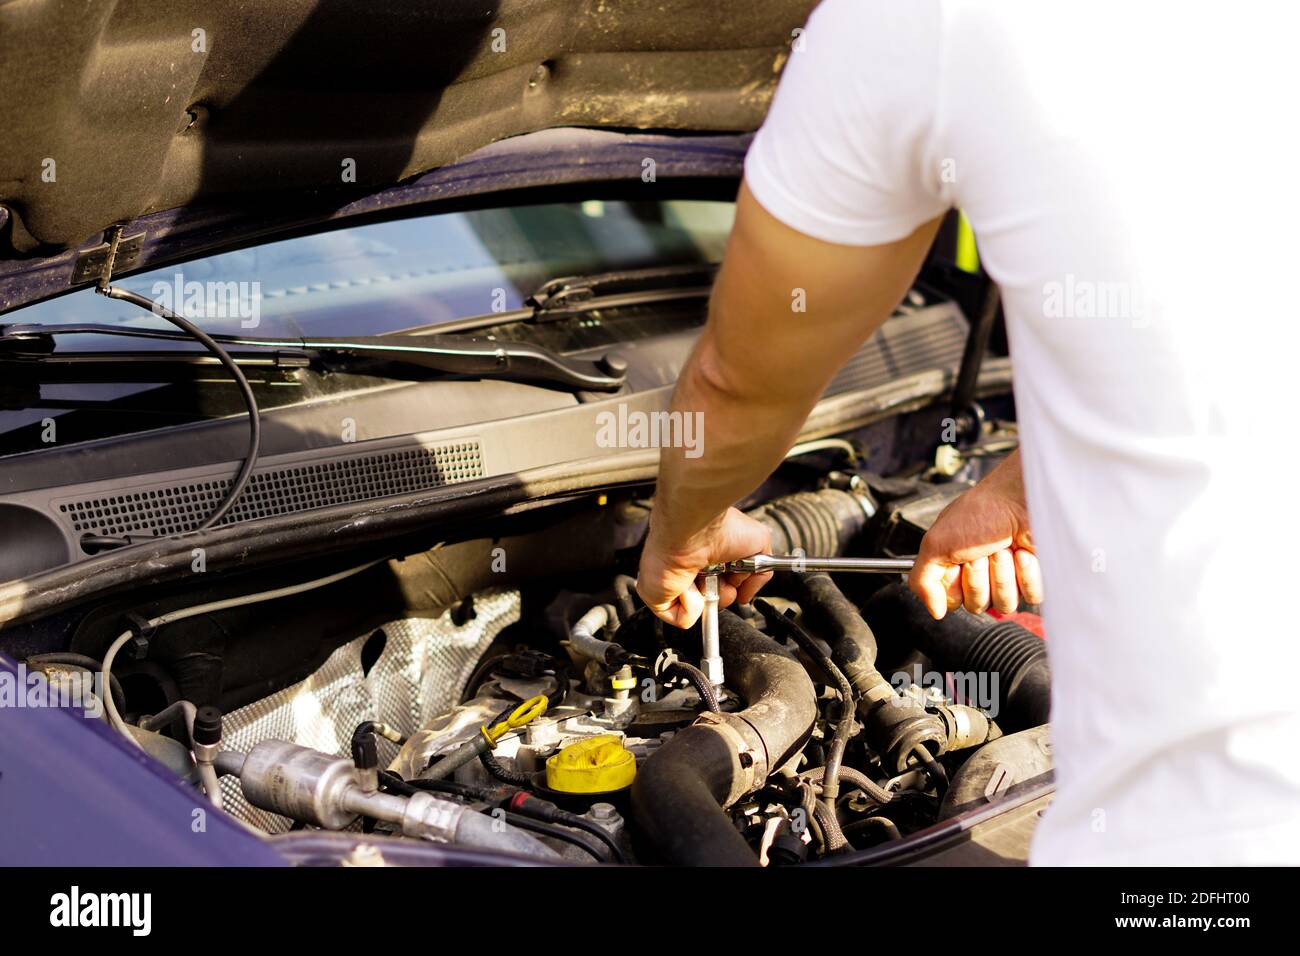 repairman is checking the car engine Stock Photo